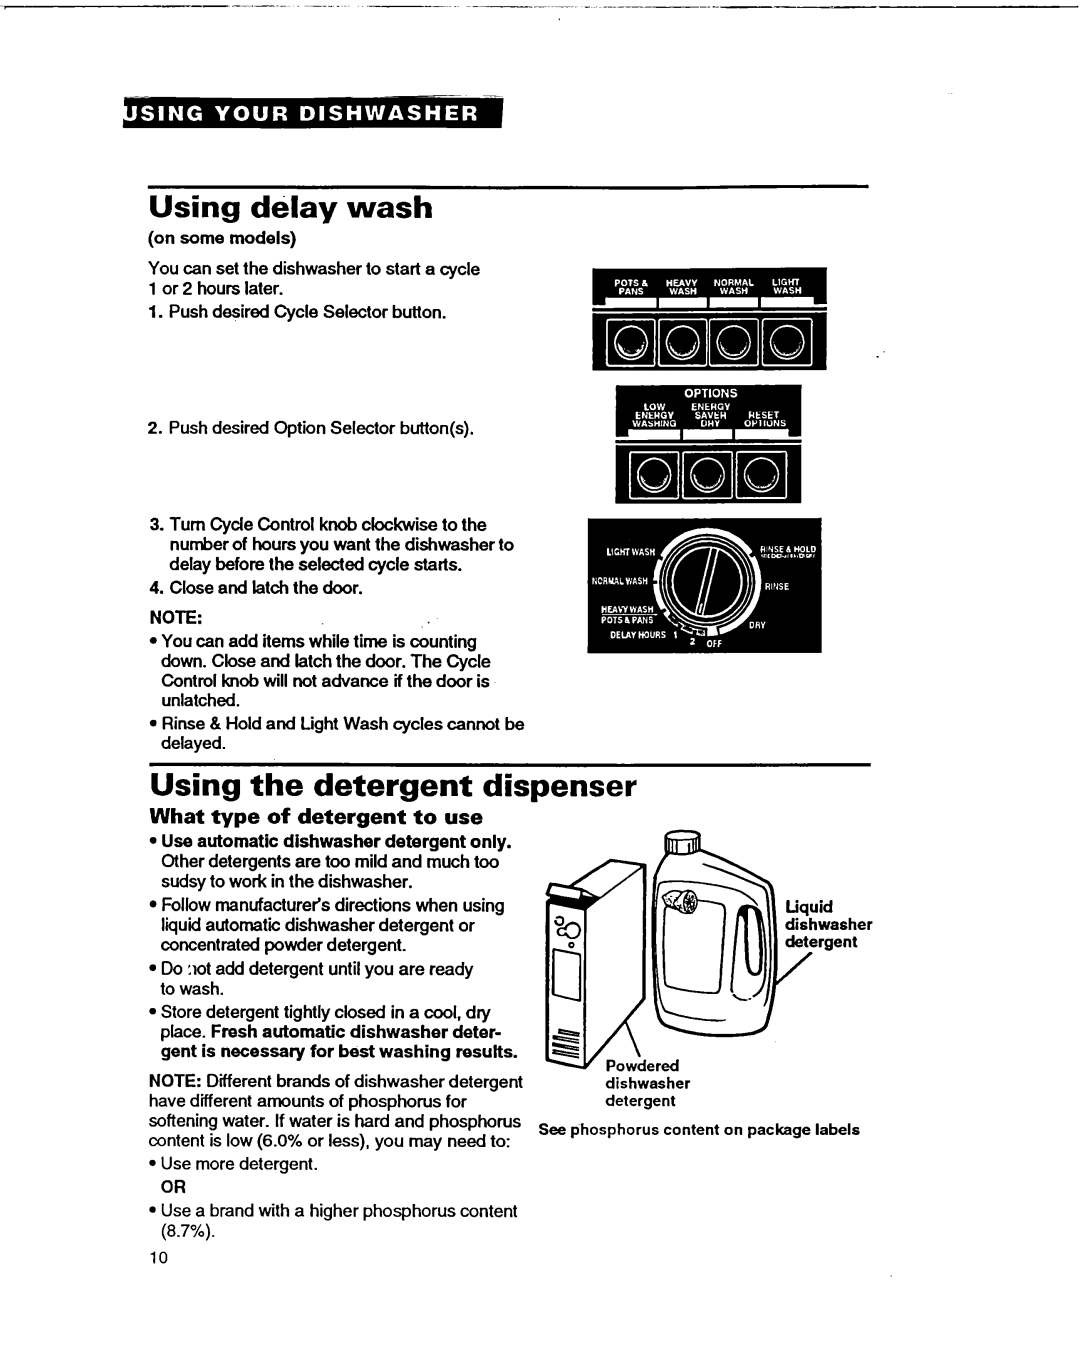 Whirlpool WU4000, WU5750 Using delay wash, Using the detergent dispenser, What type of detergent to use, on some models 